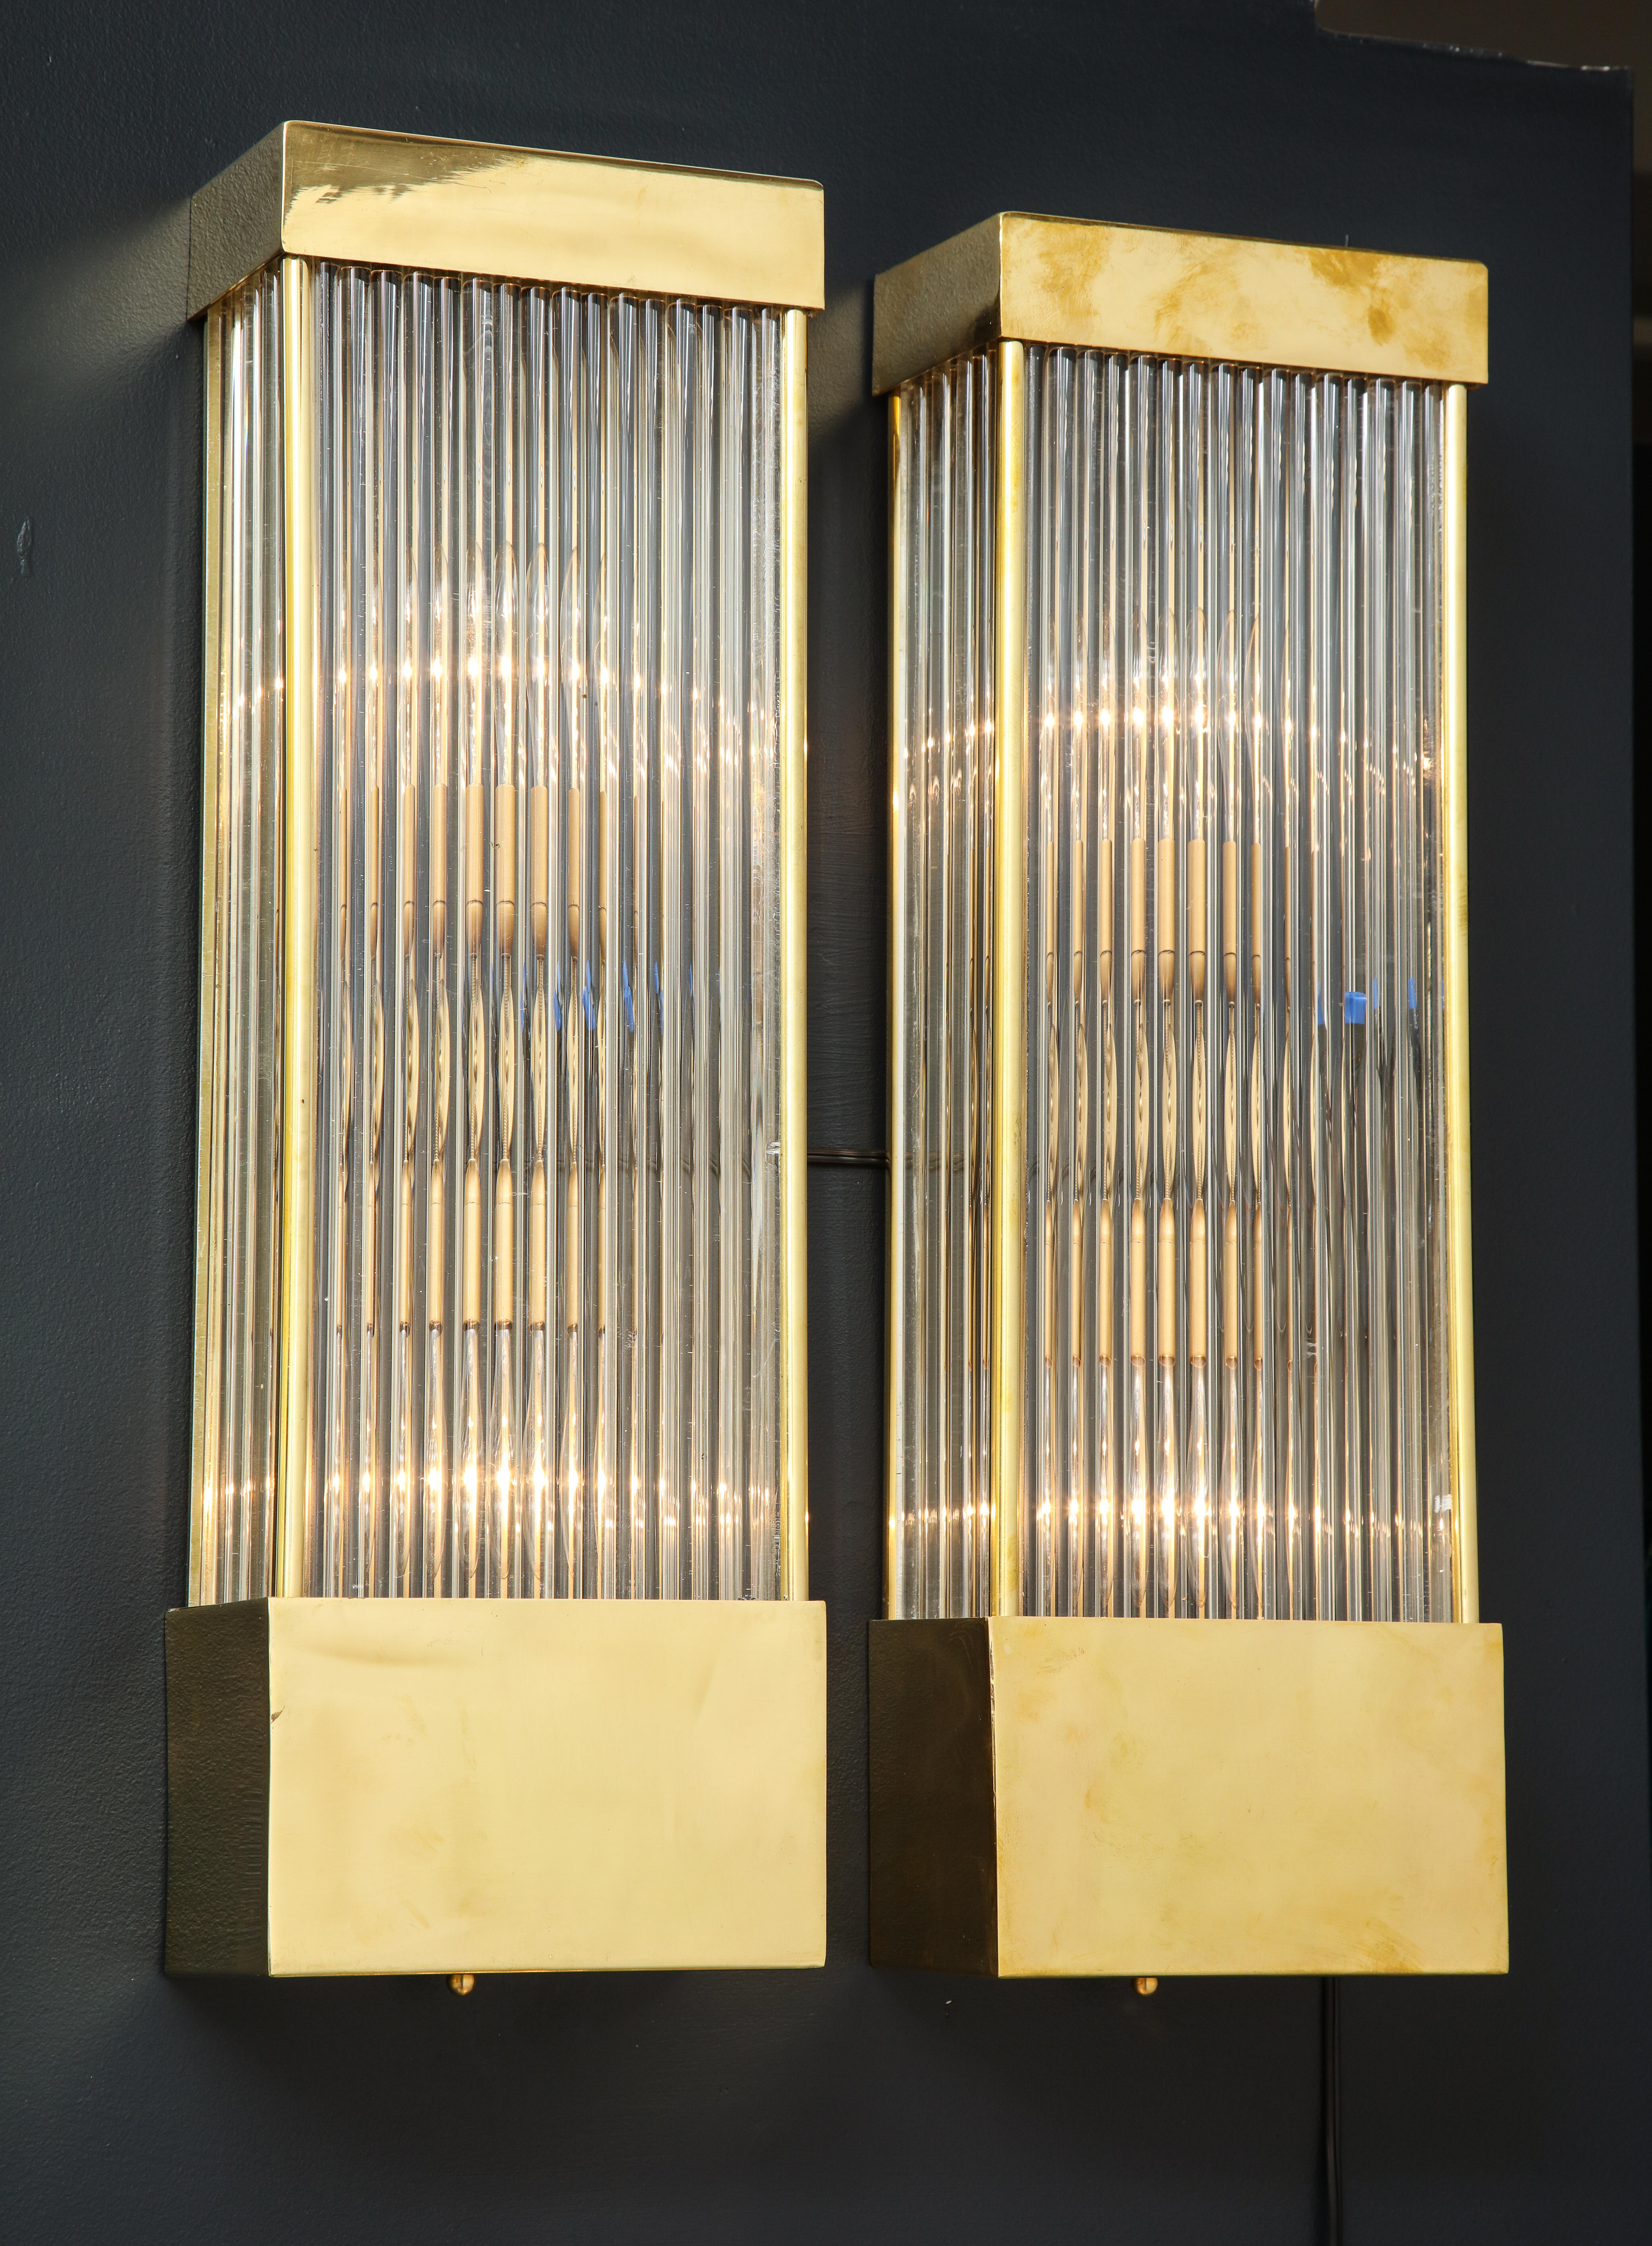 Large pair of clear Murano glass rods with brass frame rectangular sconces.  Hand-casted, narrow, clear glass rods form the body of these sconces which are held together by the brass rectangular caps on each end. When lit, the glass rods reflect a